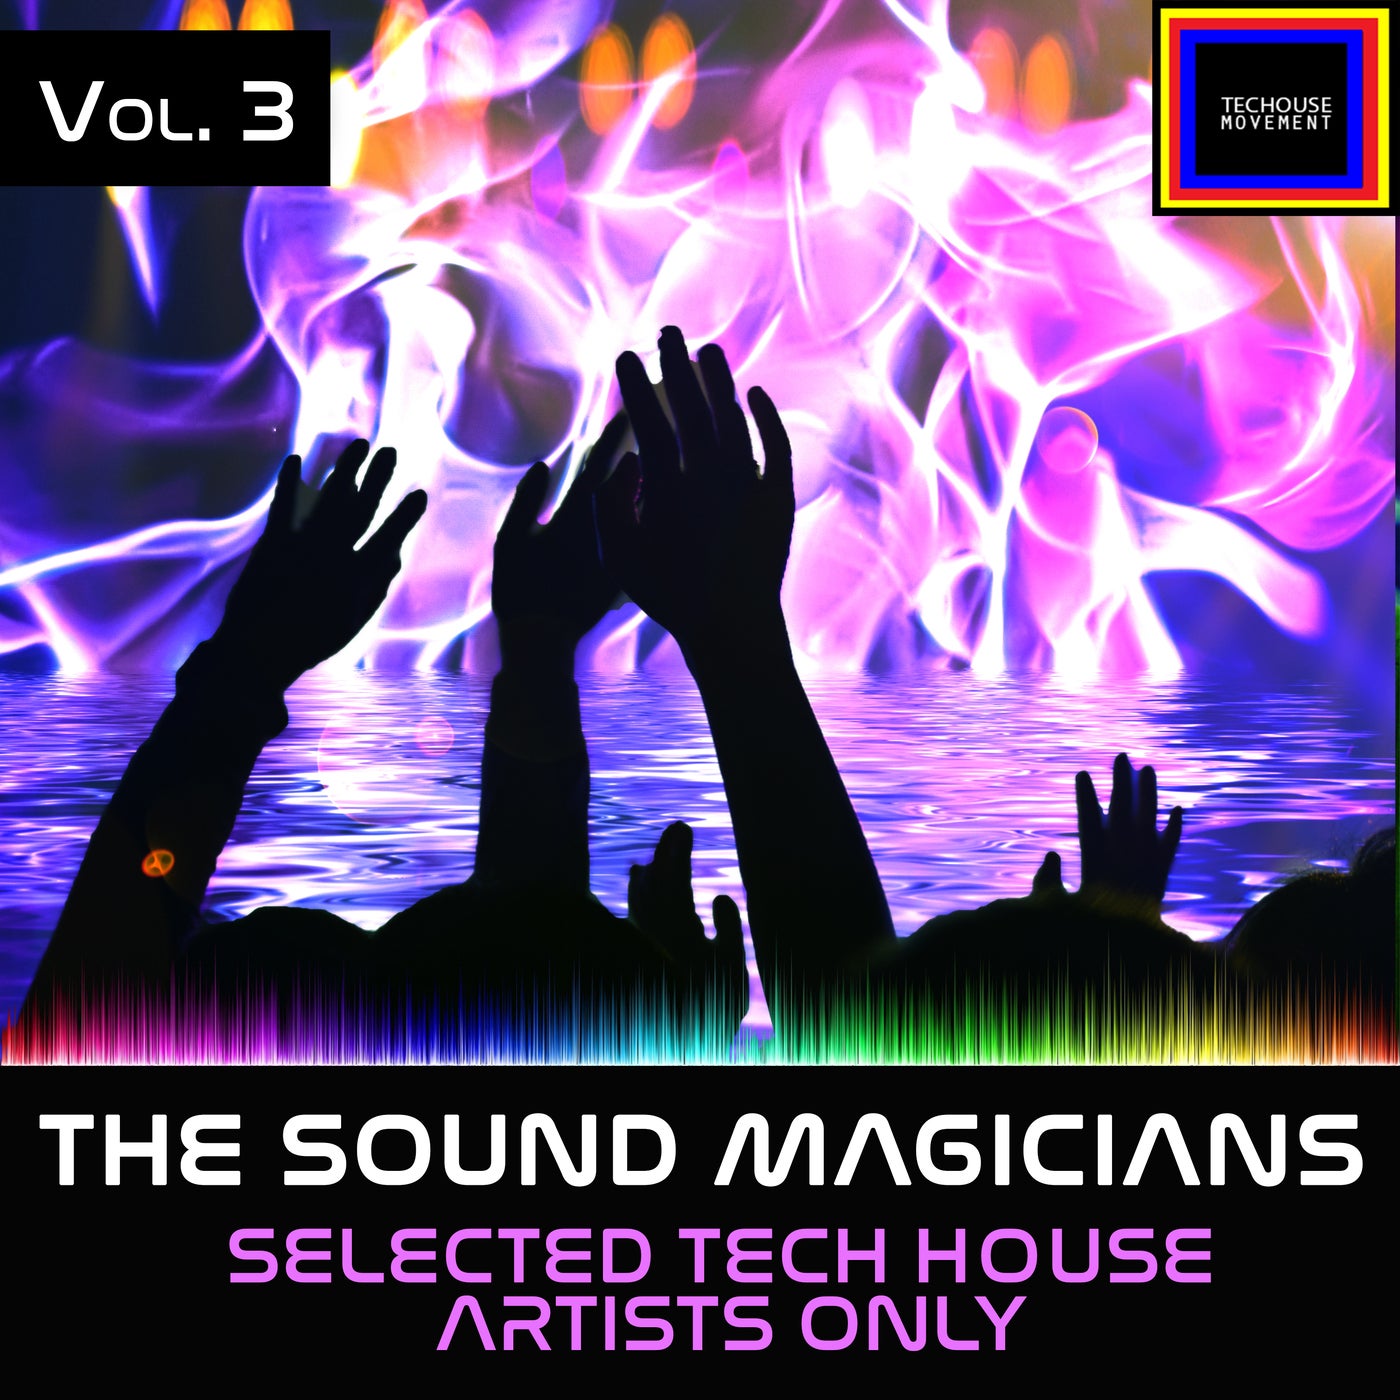 The Sound Magicians, Vol. 3 - Selected Tech House Artists Only